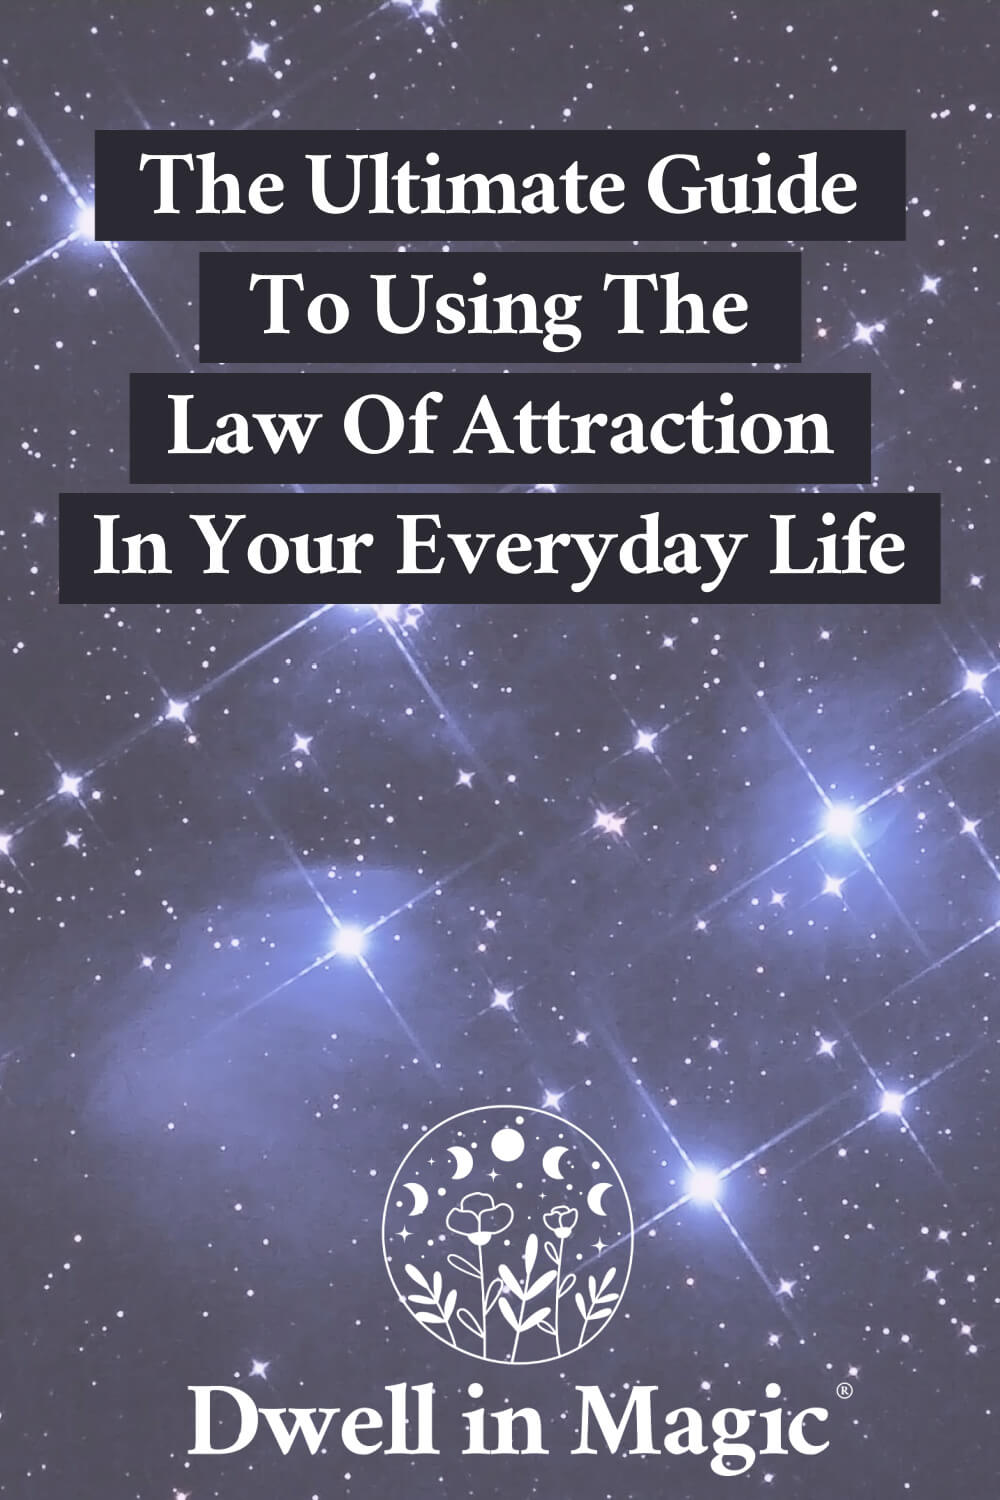 How to effectively use the law of attraction in your everyday life